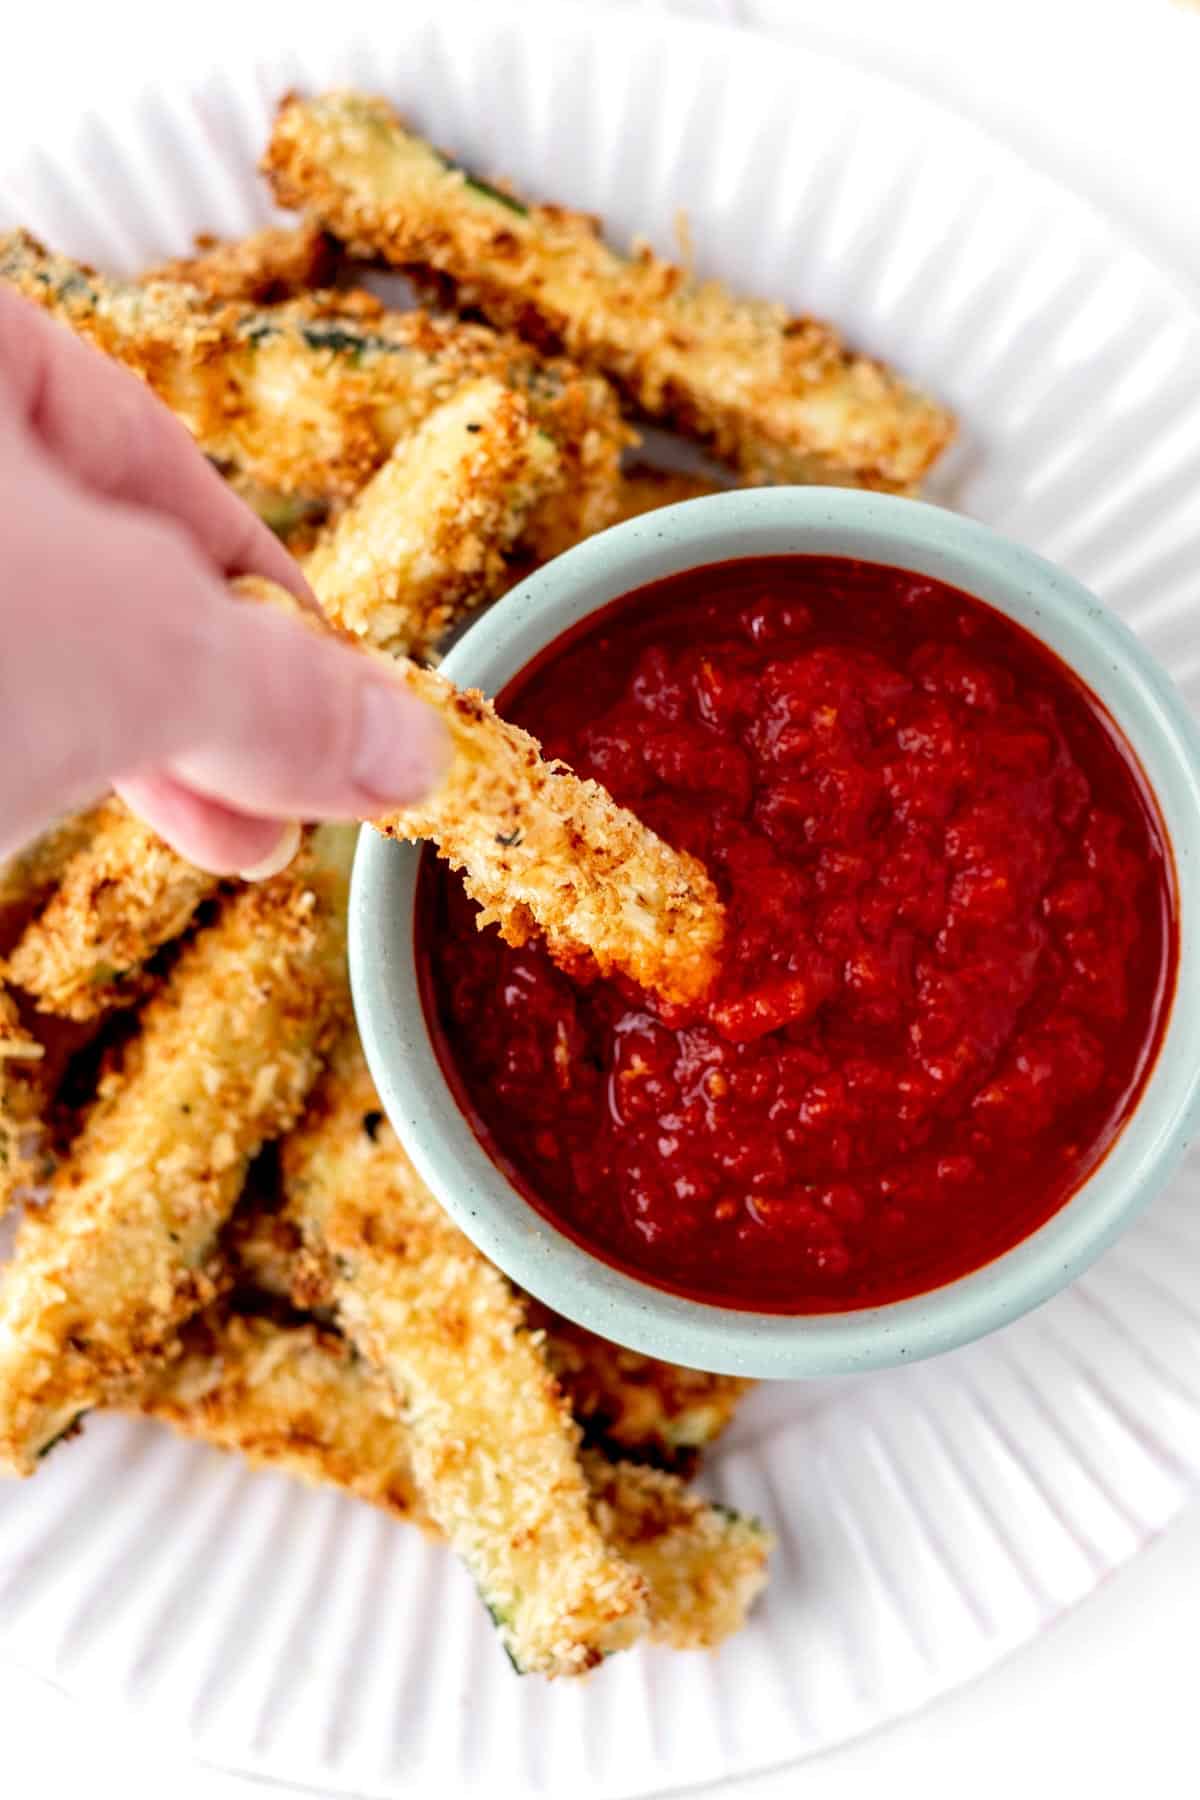 A hand dipping one of the parmesan zucchini fries in marinara sauce.